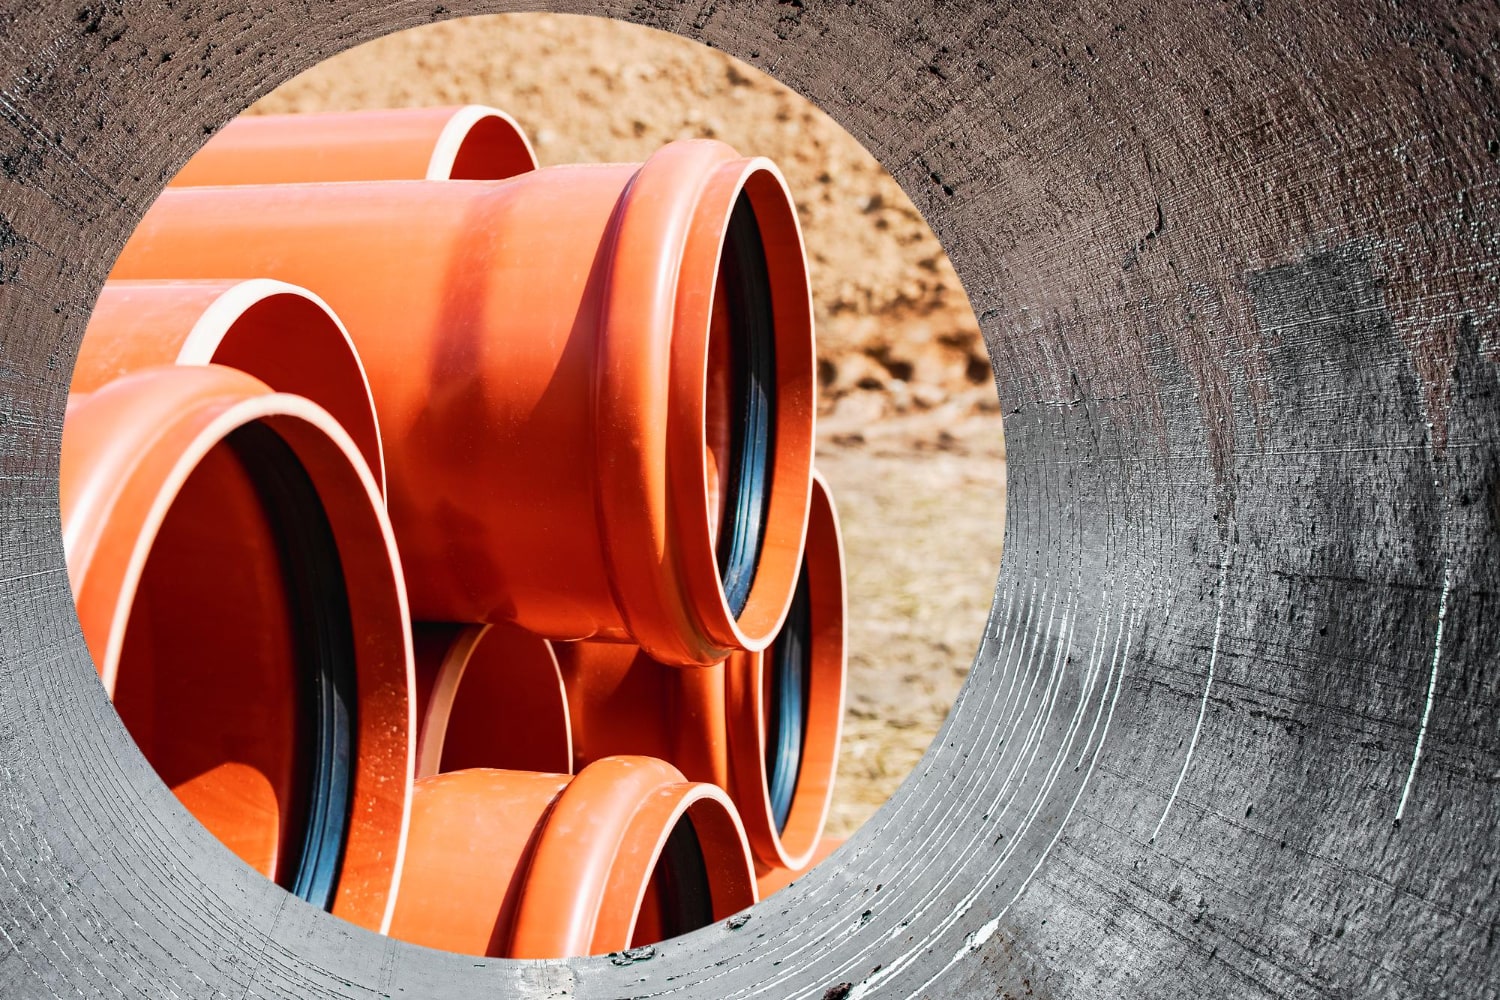 orange-sewer-pipes-close-up-underground-pipeline-works-modern-sewage-disposal-systems-city-water-supply-home-view-from-big-pipe-min